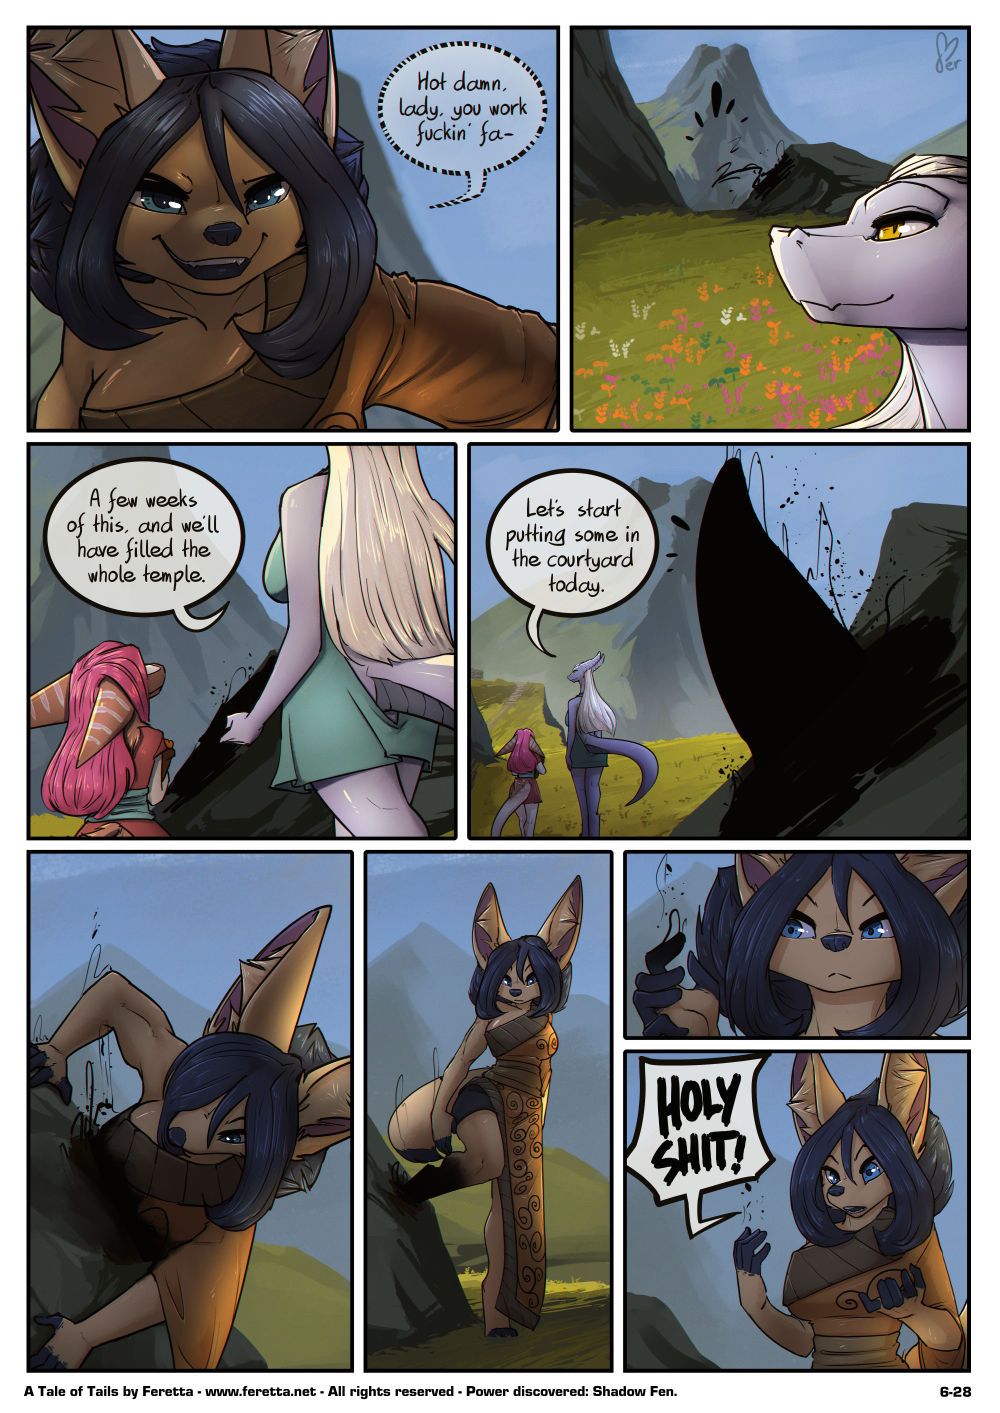 [Feretta] A Tale of Tails: Chapter 6 - Paths converge (ongoing) 29